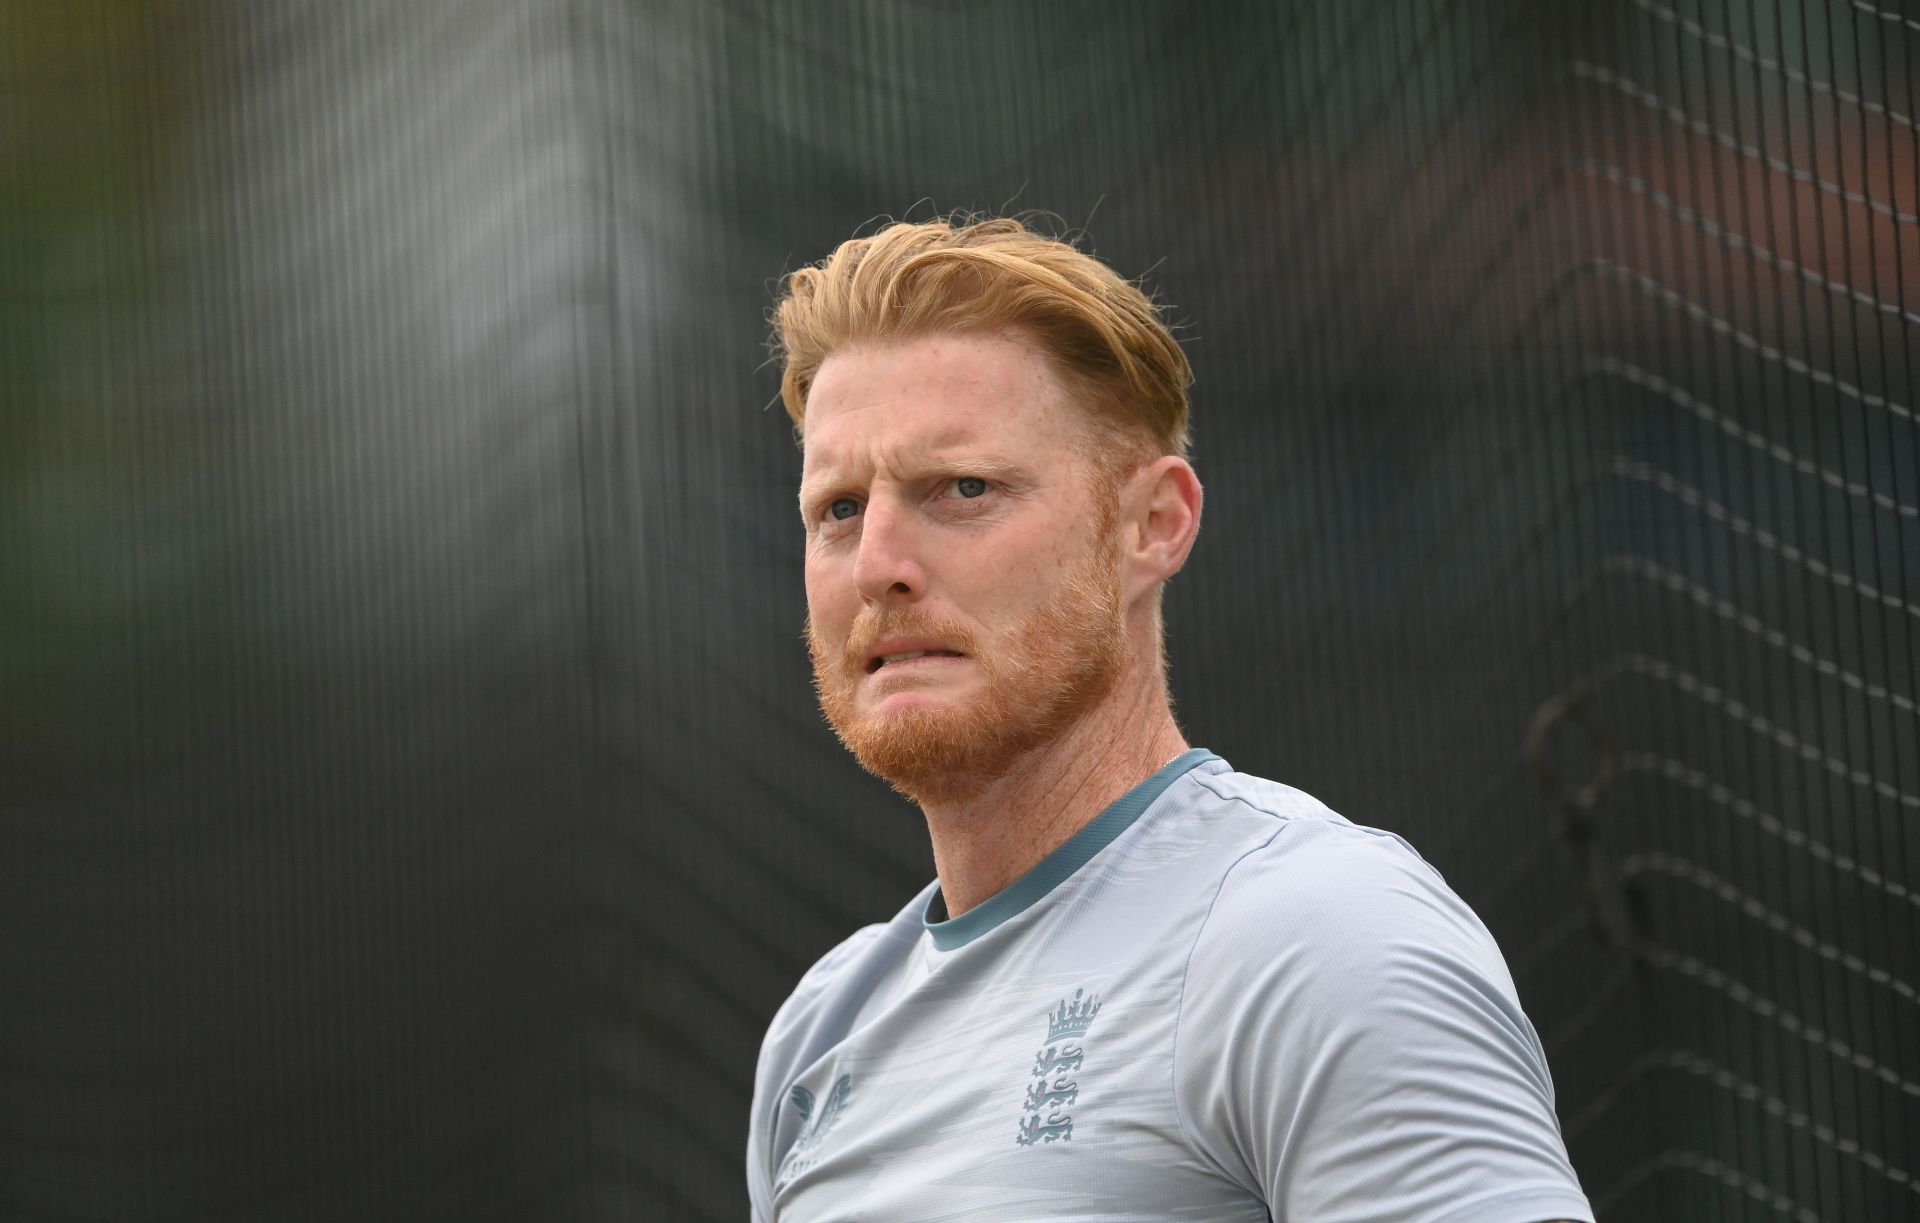 Ben Stokes has looked in slight discomfort at times. (Credits: Getty)